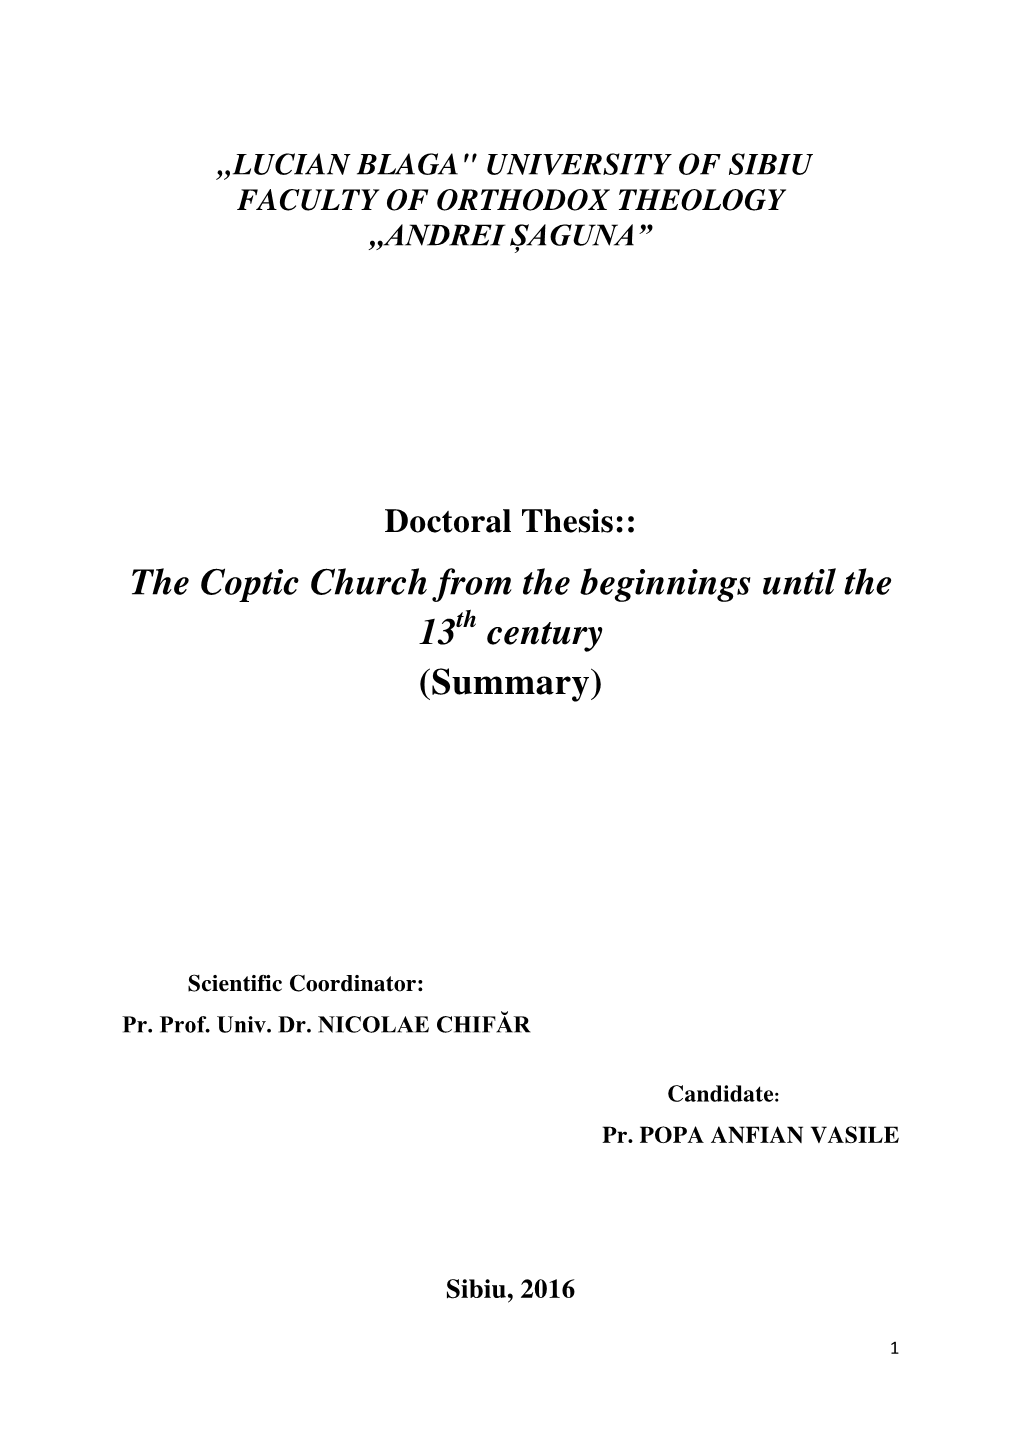 The Coptic Church from the Beginnings Until the 13 Century